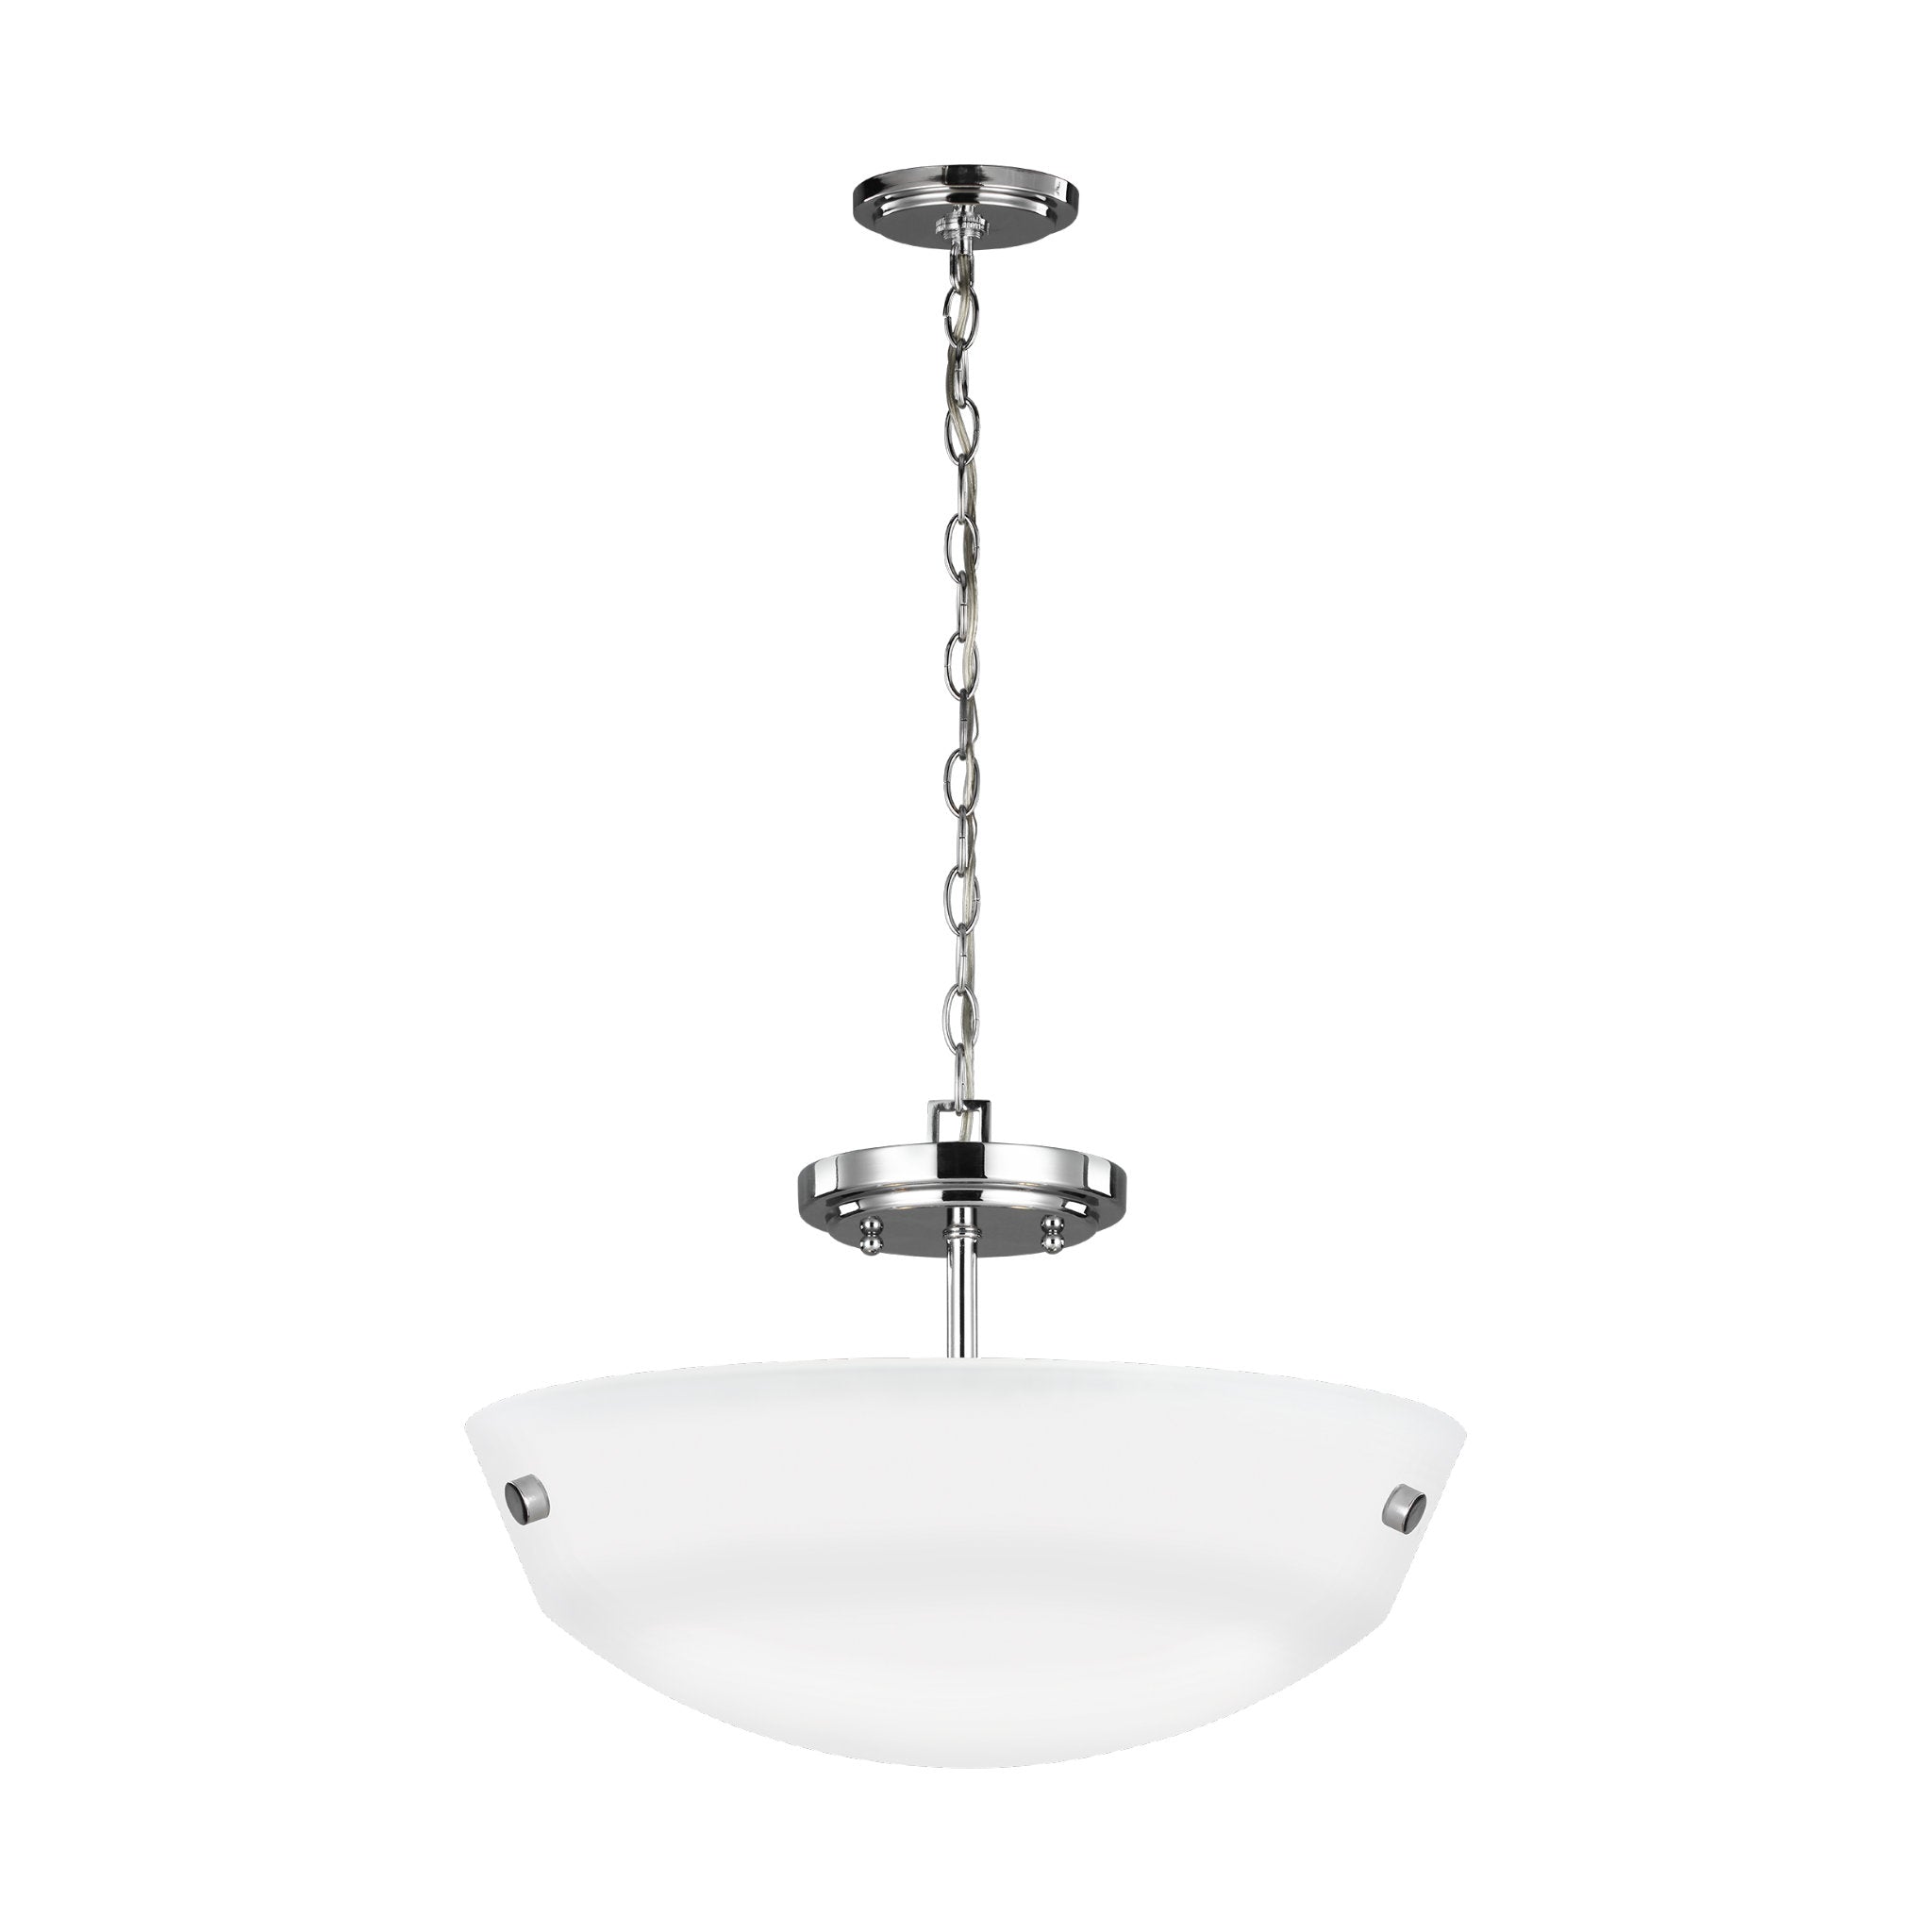 Kerrville Two Light Semi-Flush Convertible Pendant Transitional Ceiling Fixture 10.5" Height Steel Round Satin Etched Shade in Chrome